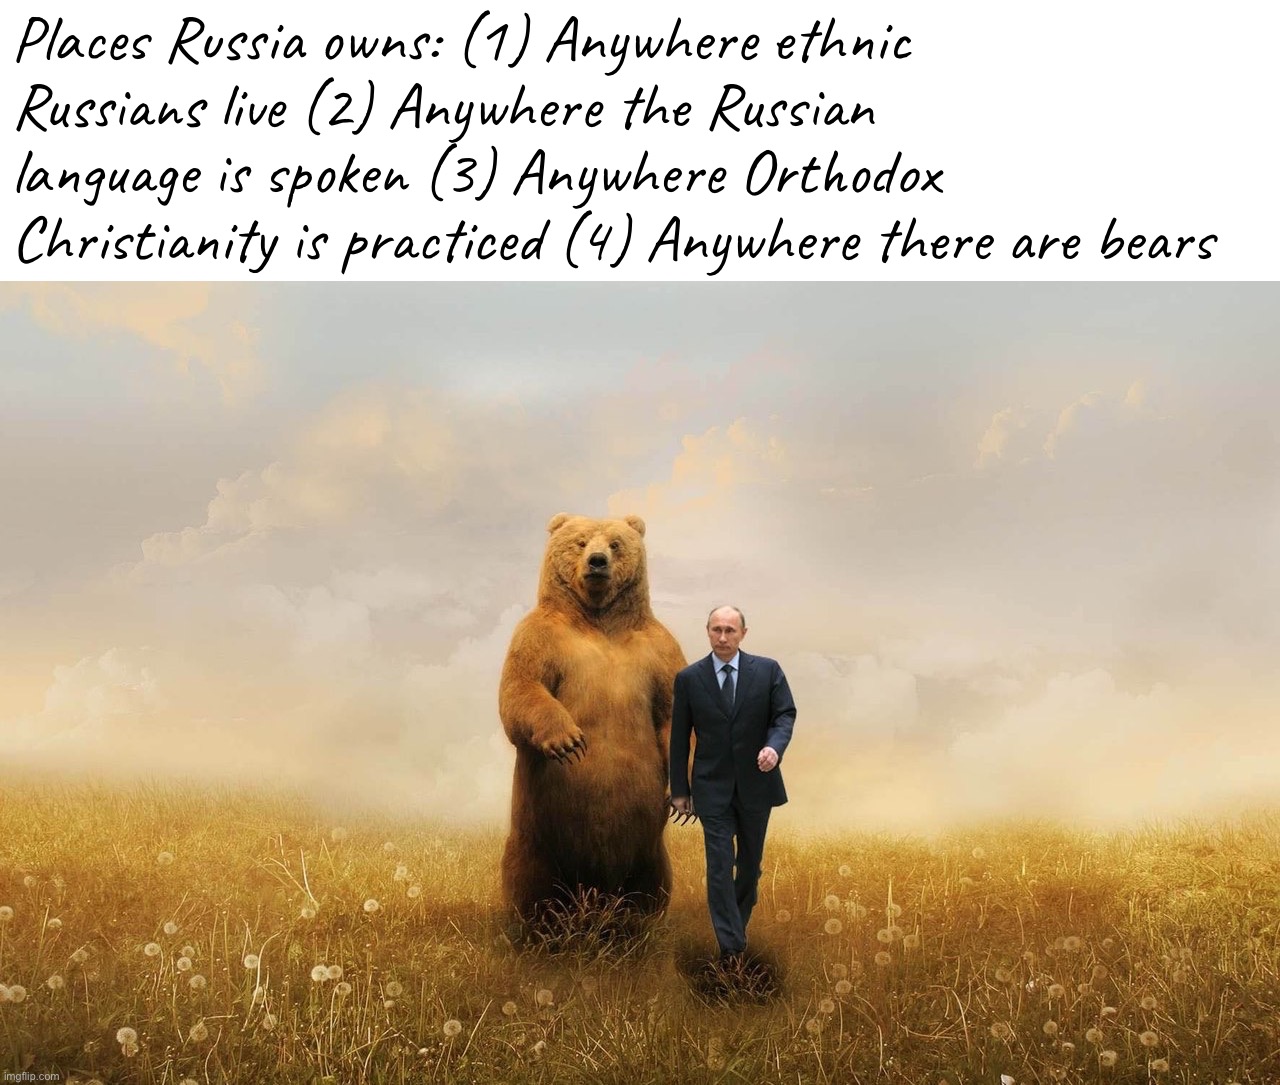 The Russian world: defined | Places Russia owns: (1) Anywhere ethnic Russians live (2) Anywhere the Russian language is spoken (3) Anywhere Orthodox Christianity is practiced (4) Anywhere there are bears | image tagged in birthday bear putin | made w/ Imgflip meme maker